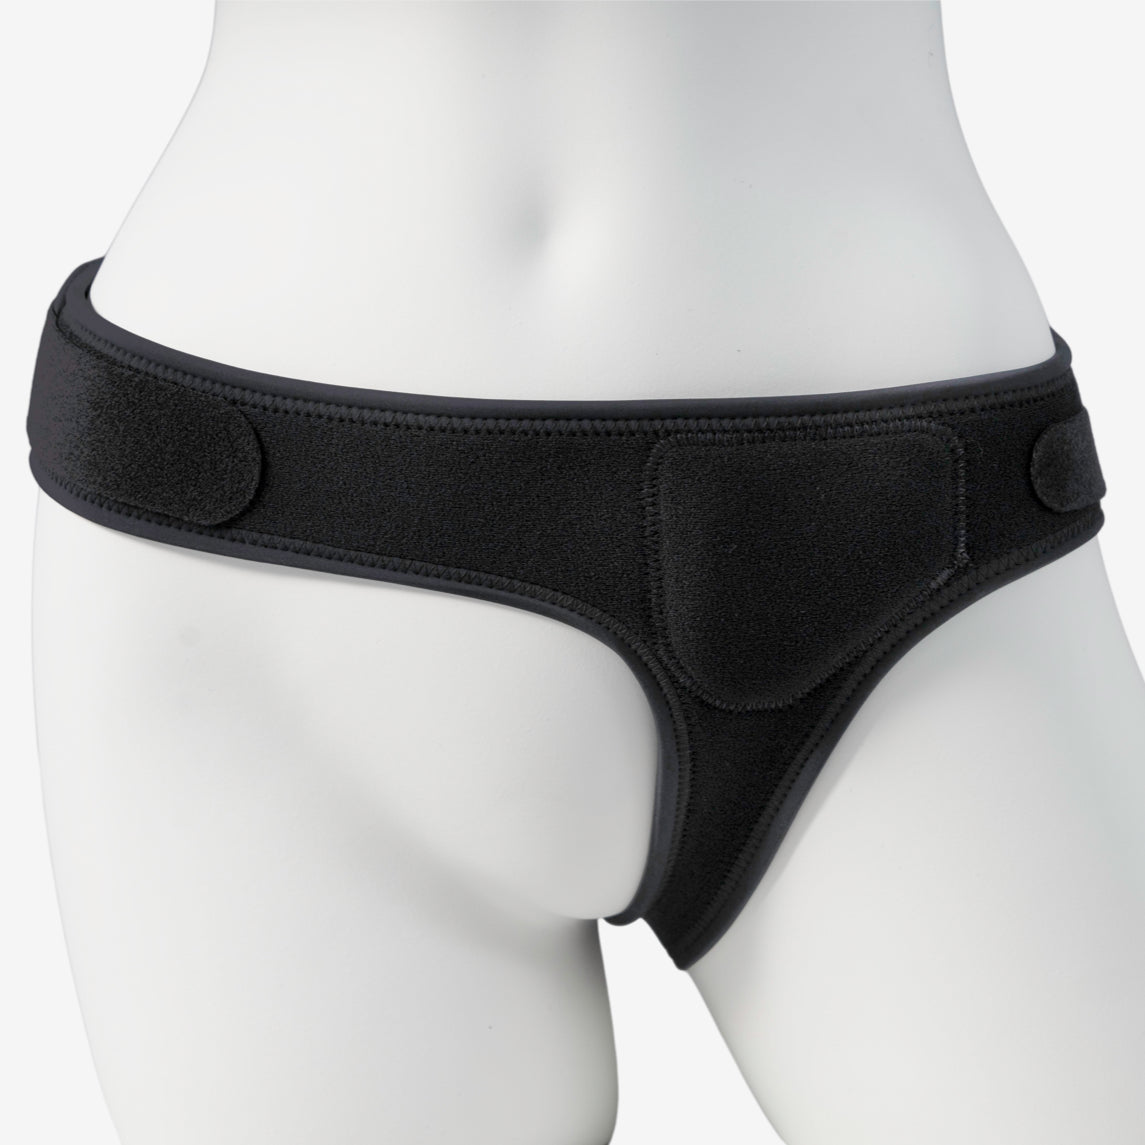 Shop Inguinal Hernia Belt Female with great discounts and prices